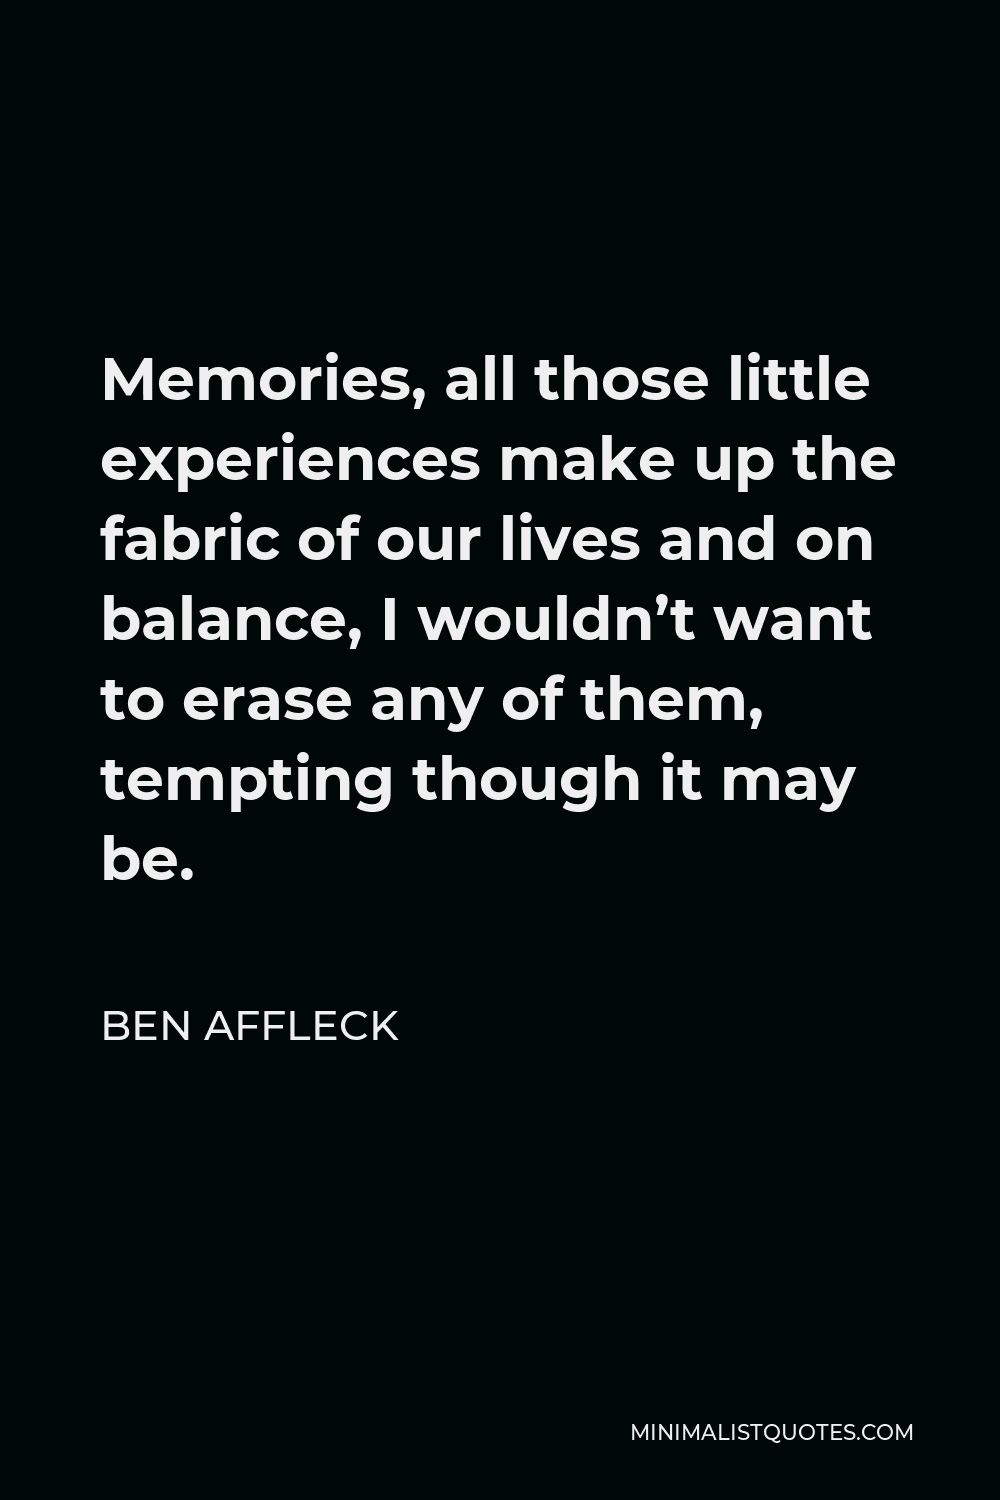 Ben Affleck Quote: Memories, all those little experiences make up the  fabric of our lives and on balance, I wouldn't want to erase any of them,  tempting though it may be.